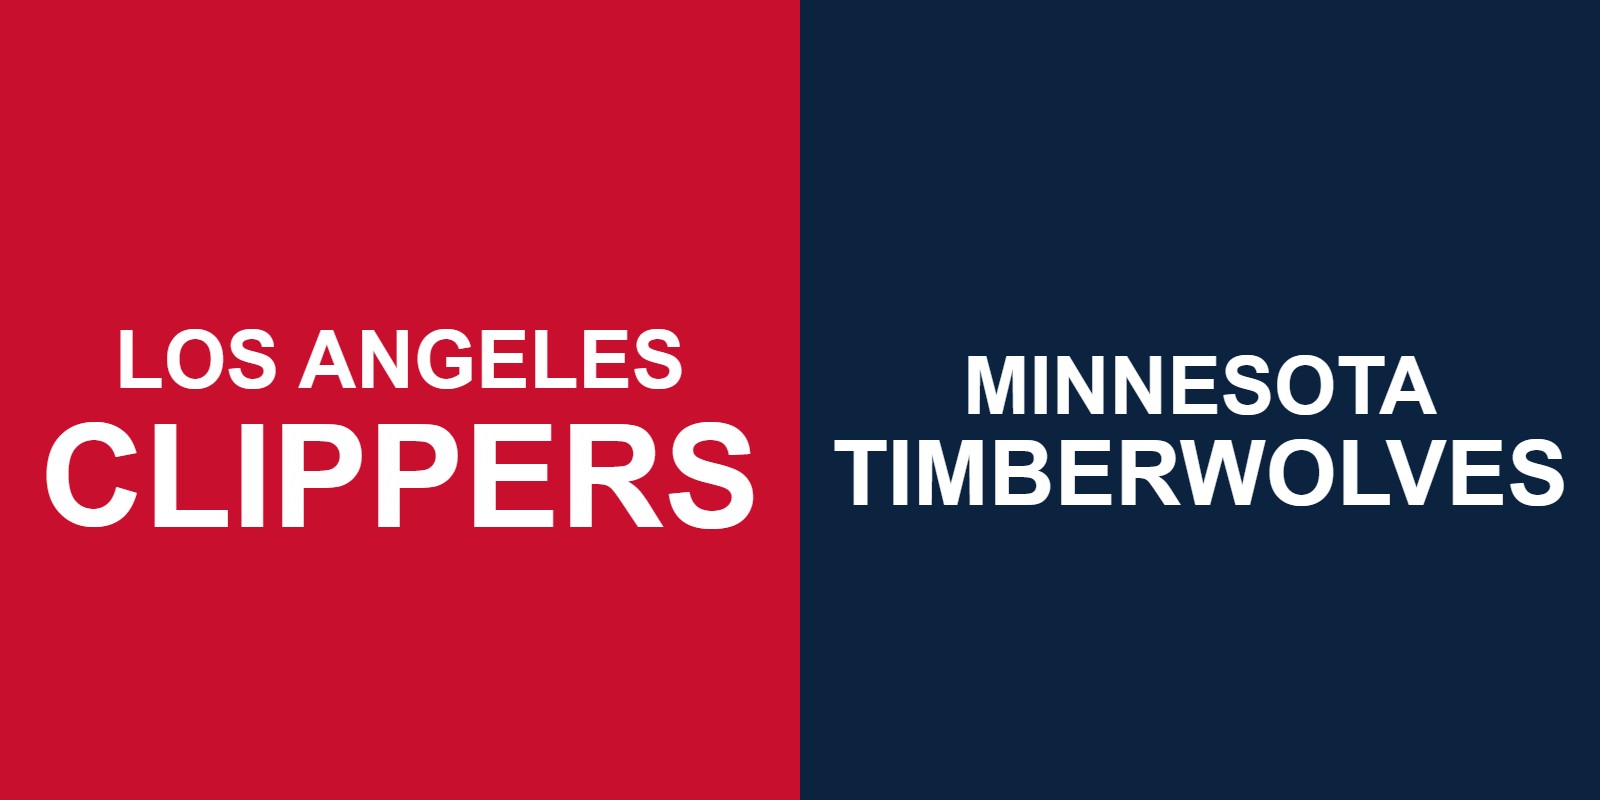 Clippers vs Timberwolves